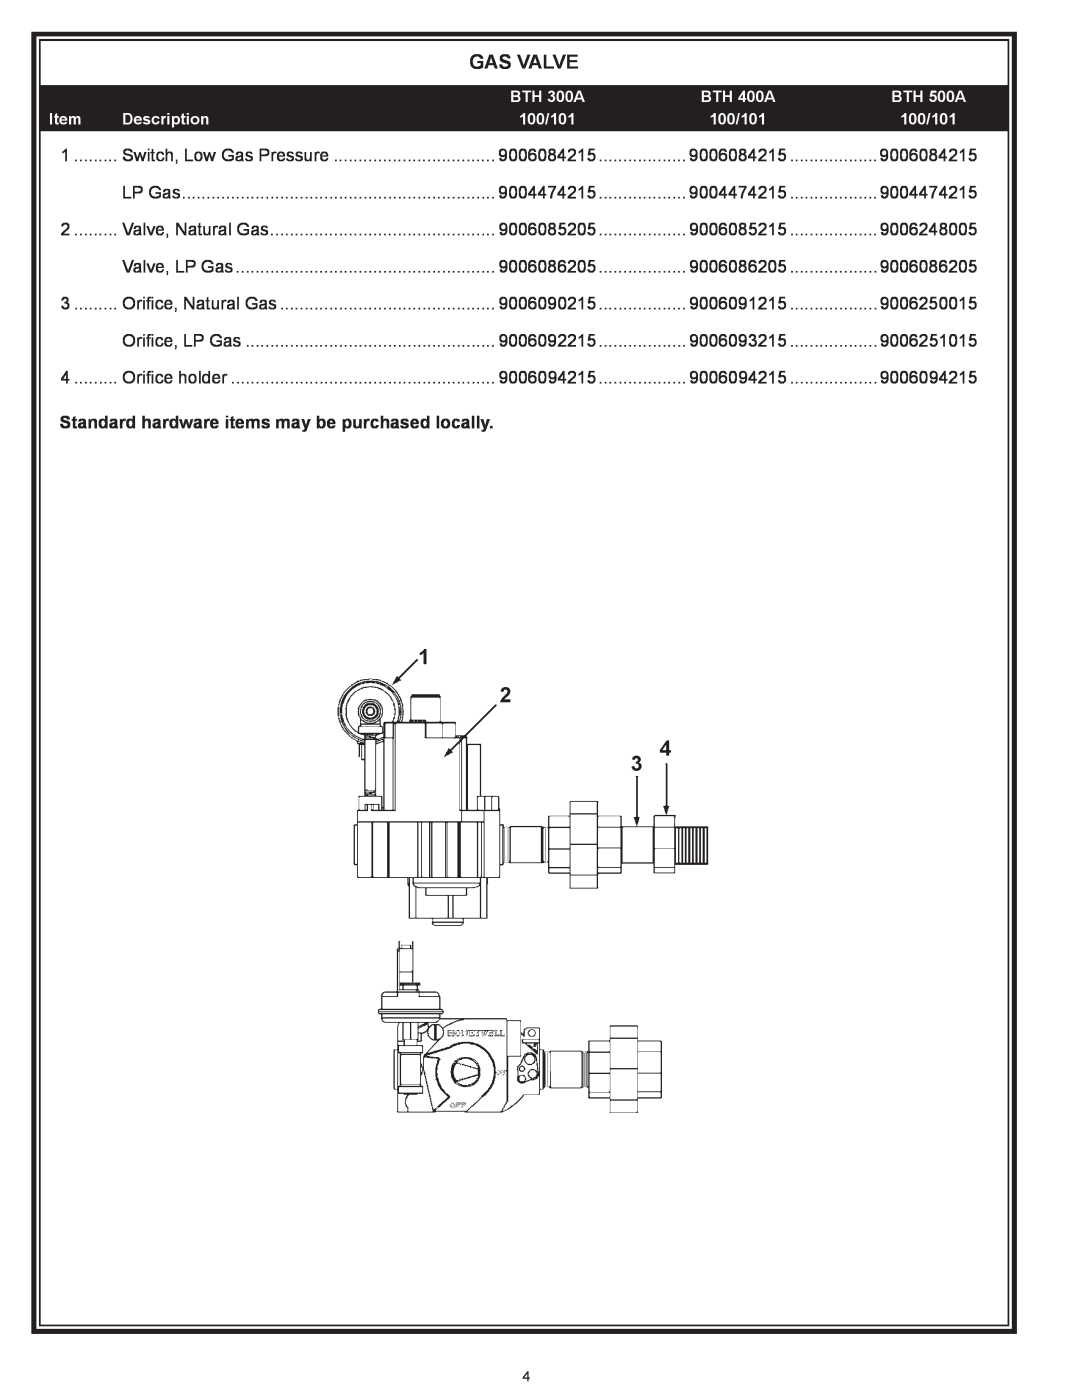 A.O. Smith BTH-500A manual Gas Valve, Standard hardware items may be purchased locally 